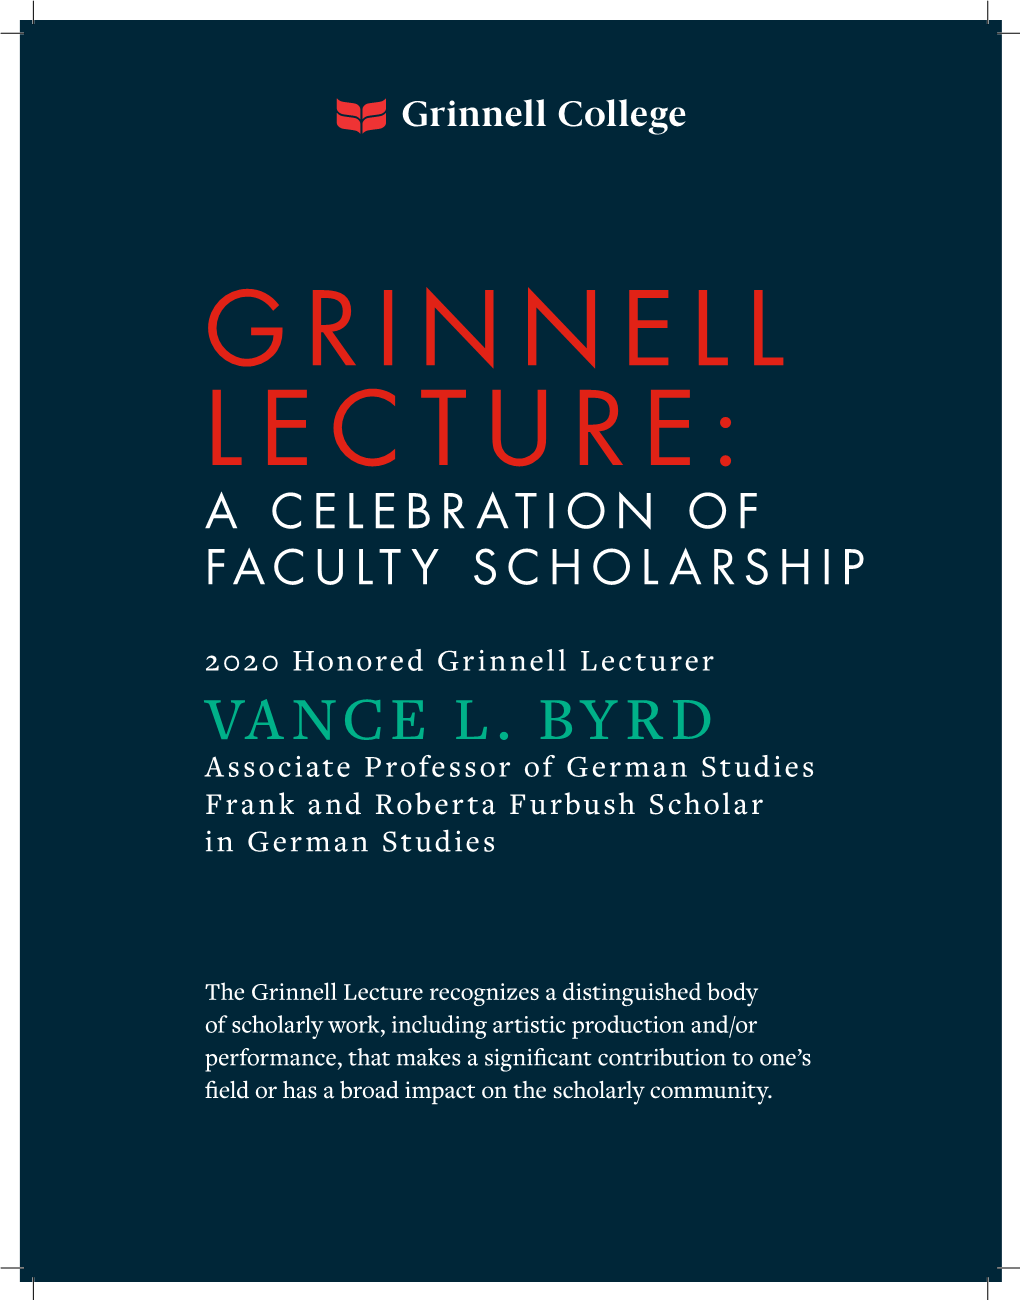 2020 Grinnell Lecture Booklet